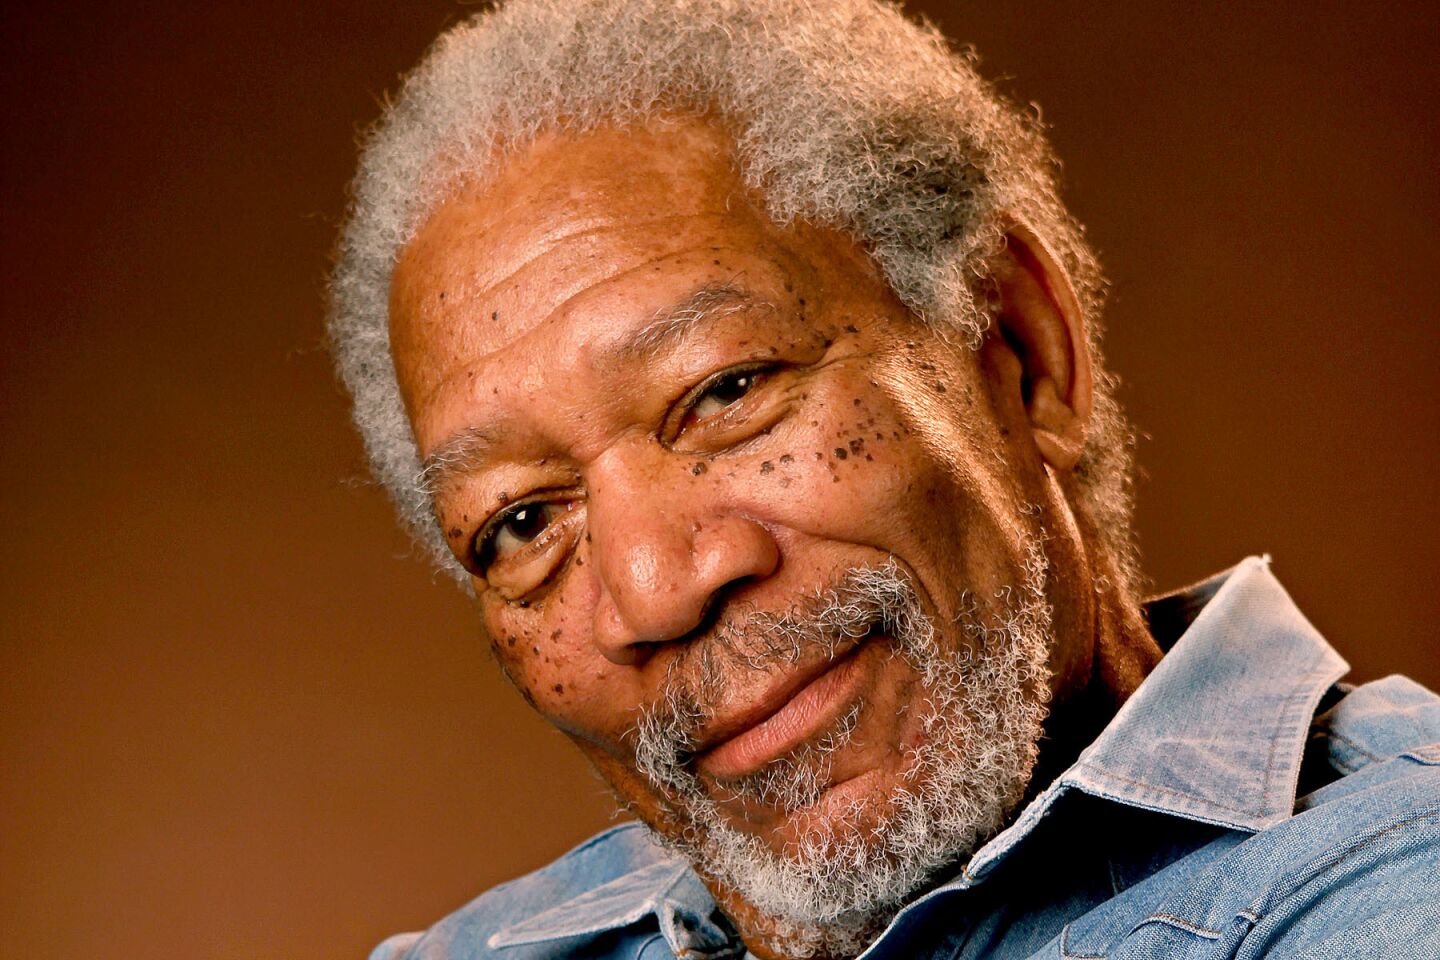 Morgan Freeman has played the president of the United States, a driver, a soldier, Nelson Mandela, a boxing trainer and God -- twice. He has been honored with numerous awards, including an Oscar, a Golden Globe an AFI Lifetime Achievement Award. Here's a look at some of his many roles.